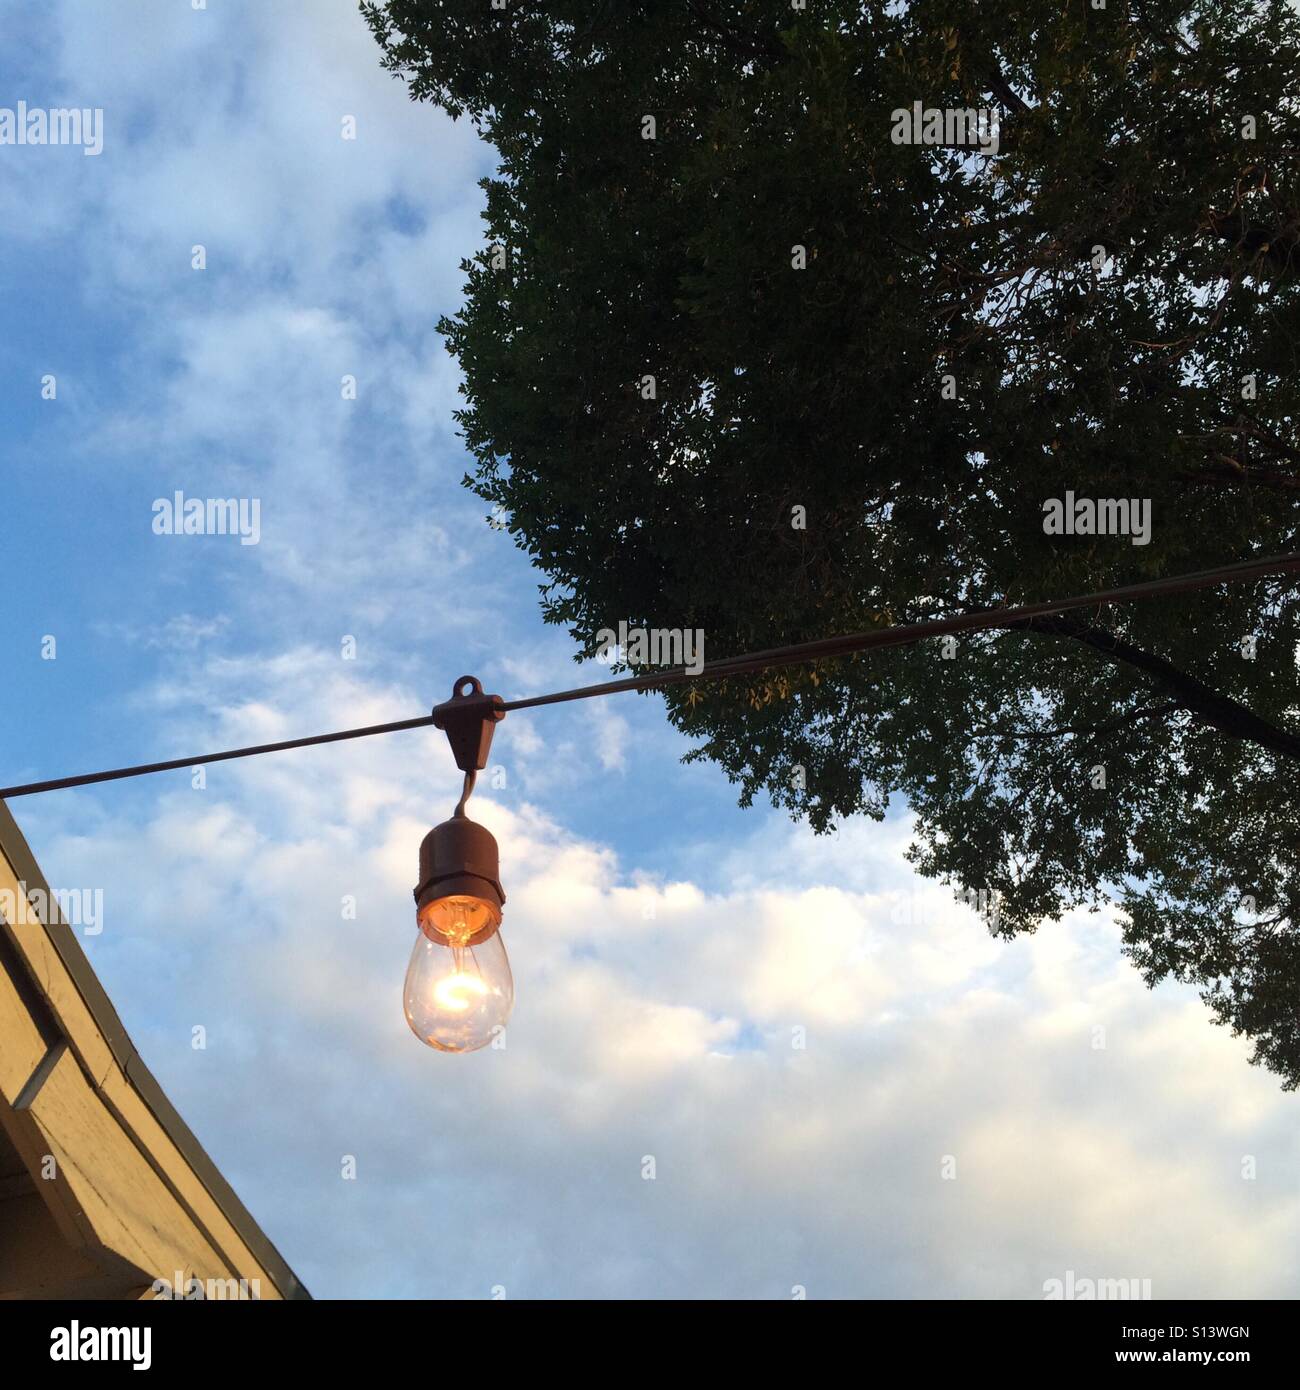 A bare bulb hangs in a backyard at evening time. Stock Photo